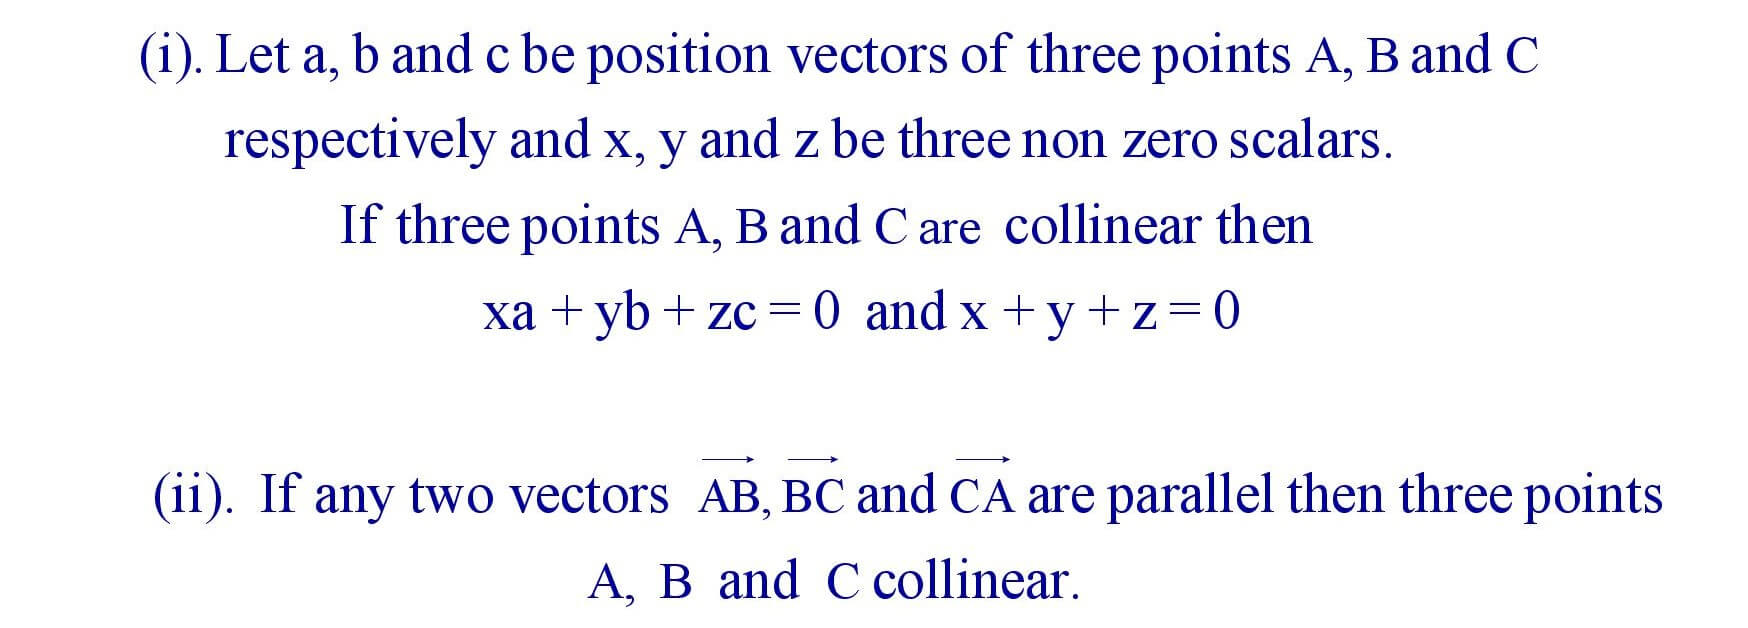 Collinearity of three Points